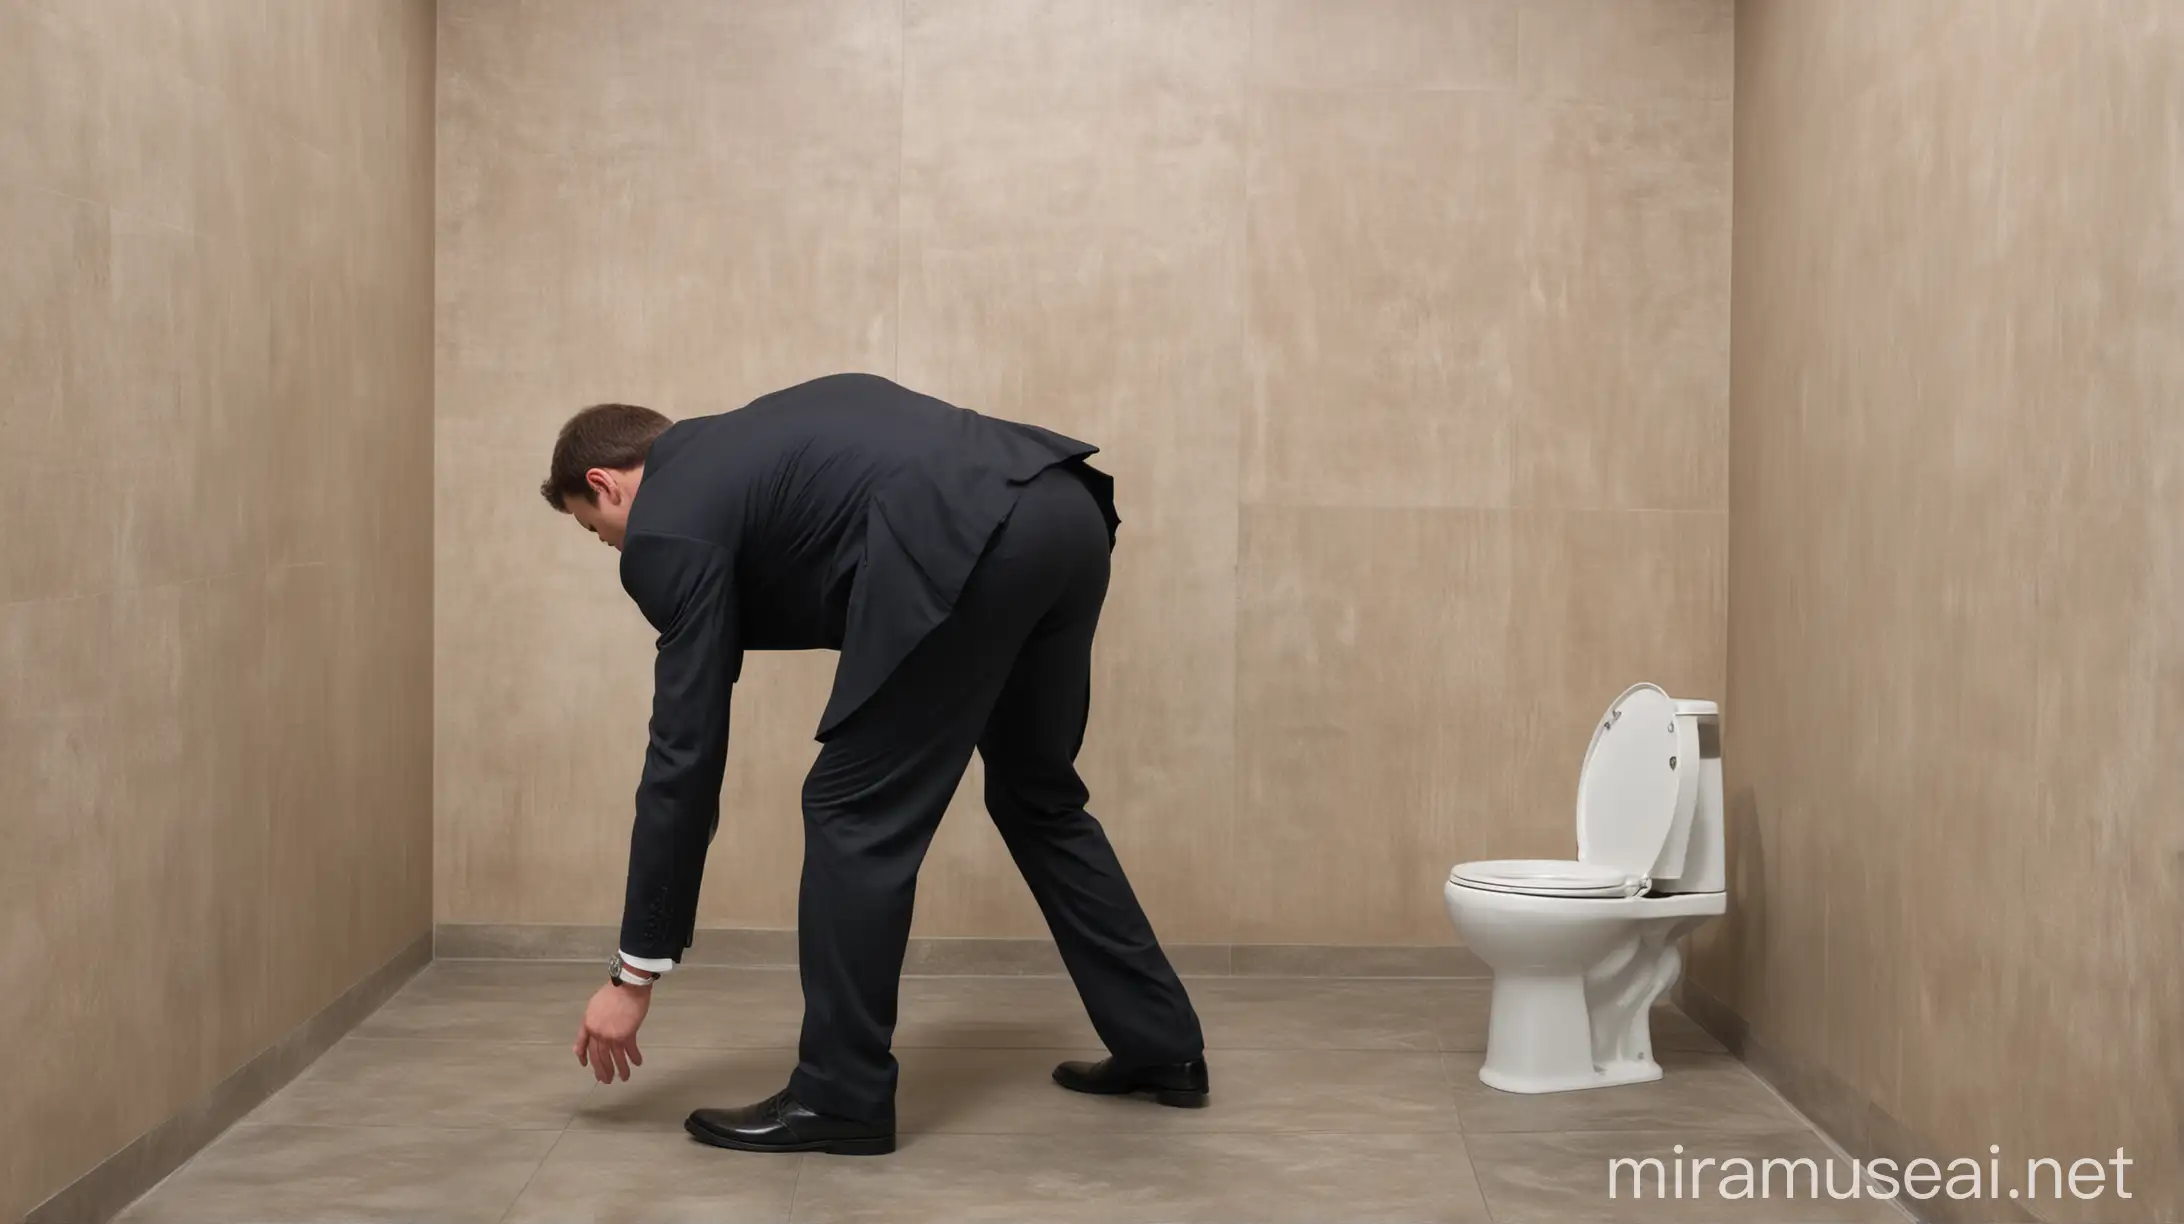 in a restroom, business men in suit and tie, bending over, approaching from the back